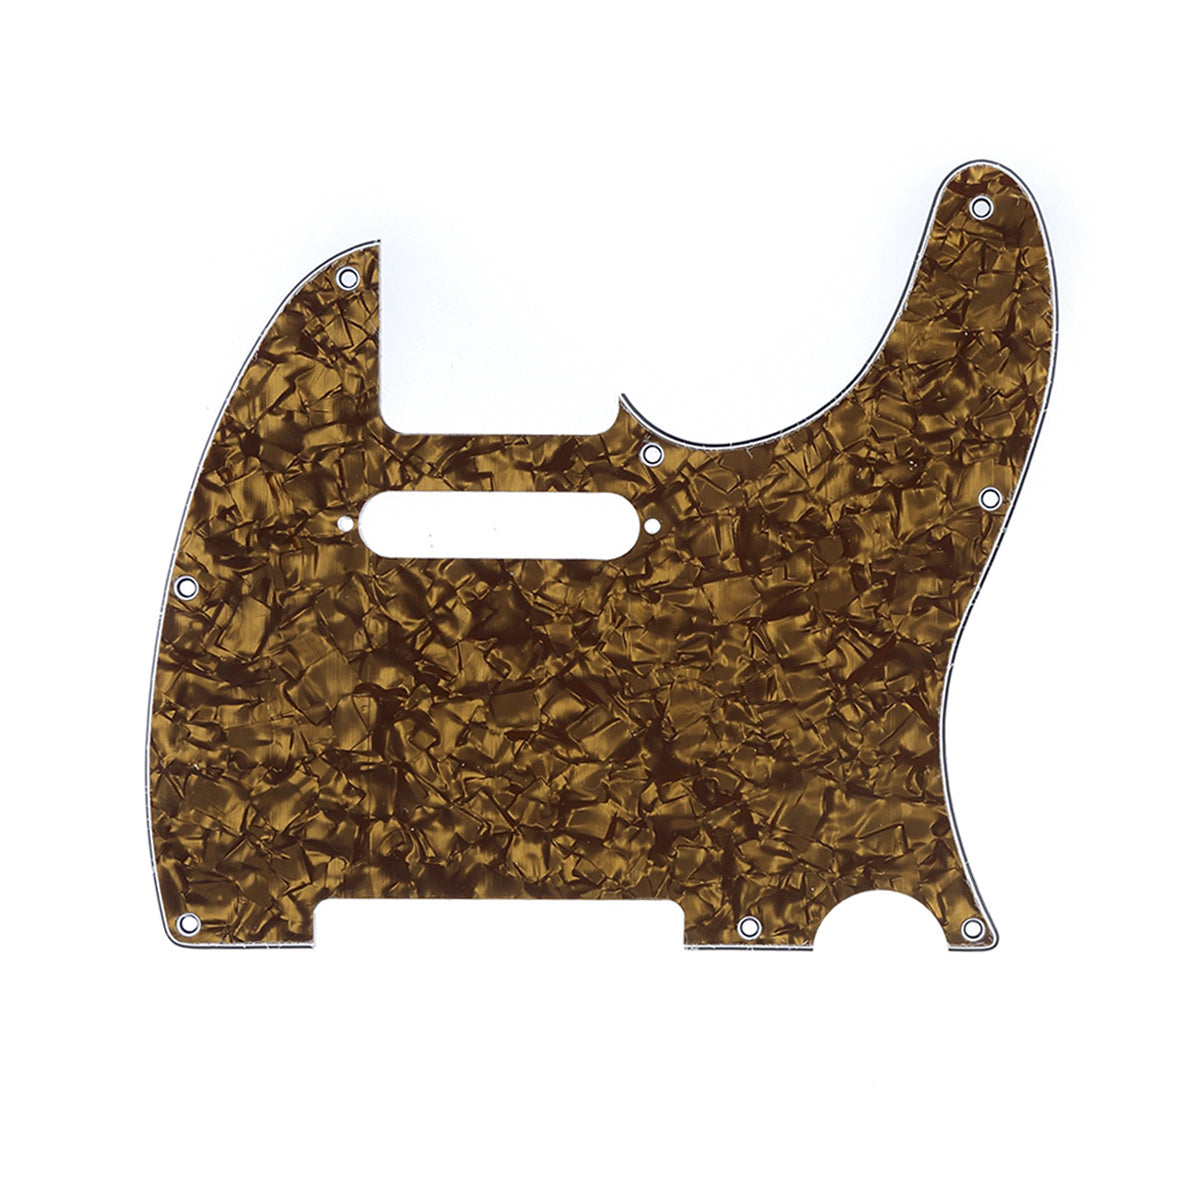 Musiclily 8 Hole Tele Guitar Pickguard for USA/Mexican Made Fender Standard Telecaster Modern Style, 4Ply Bronze Pearl